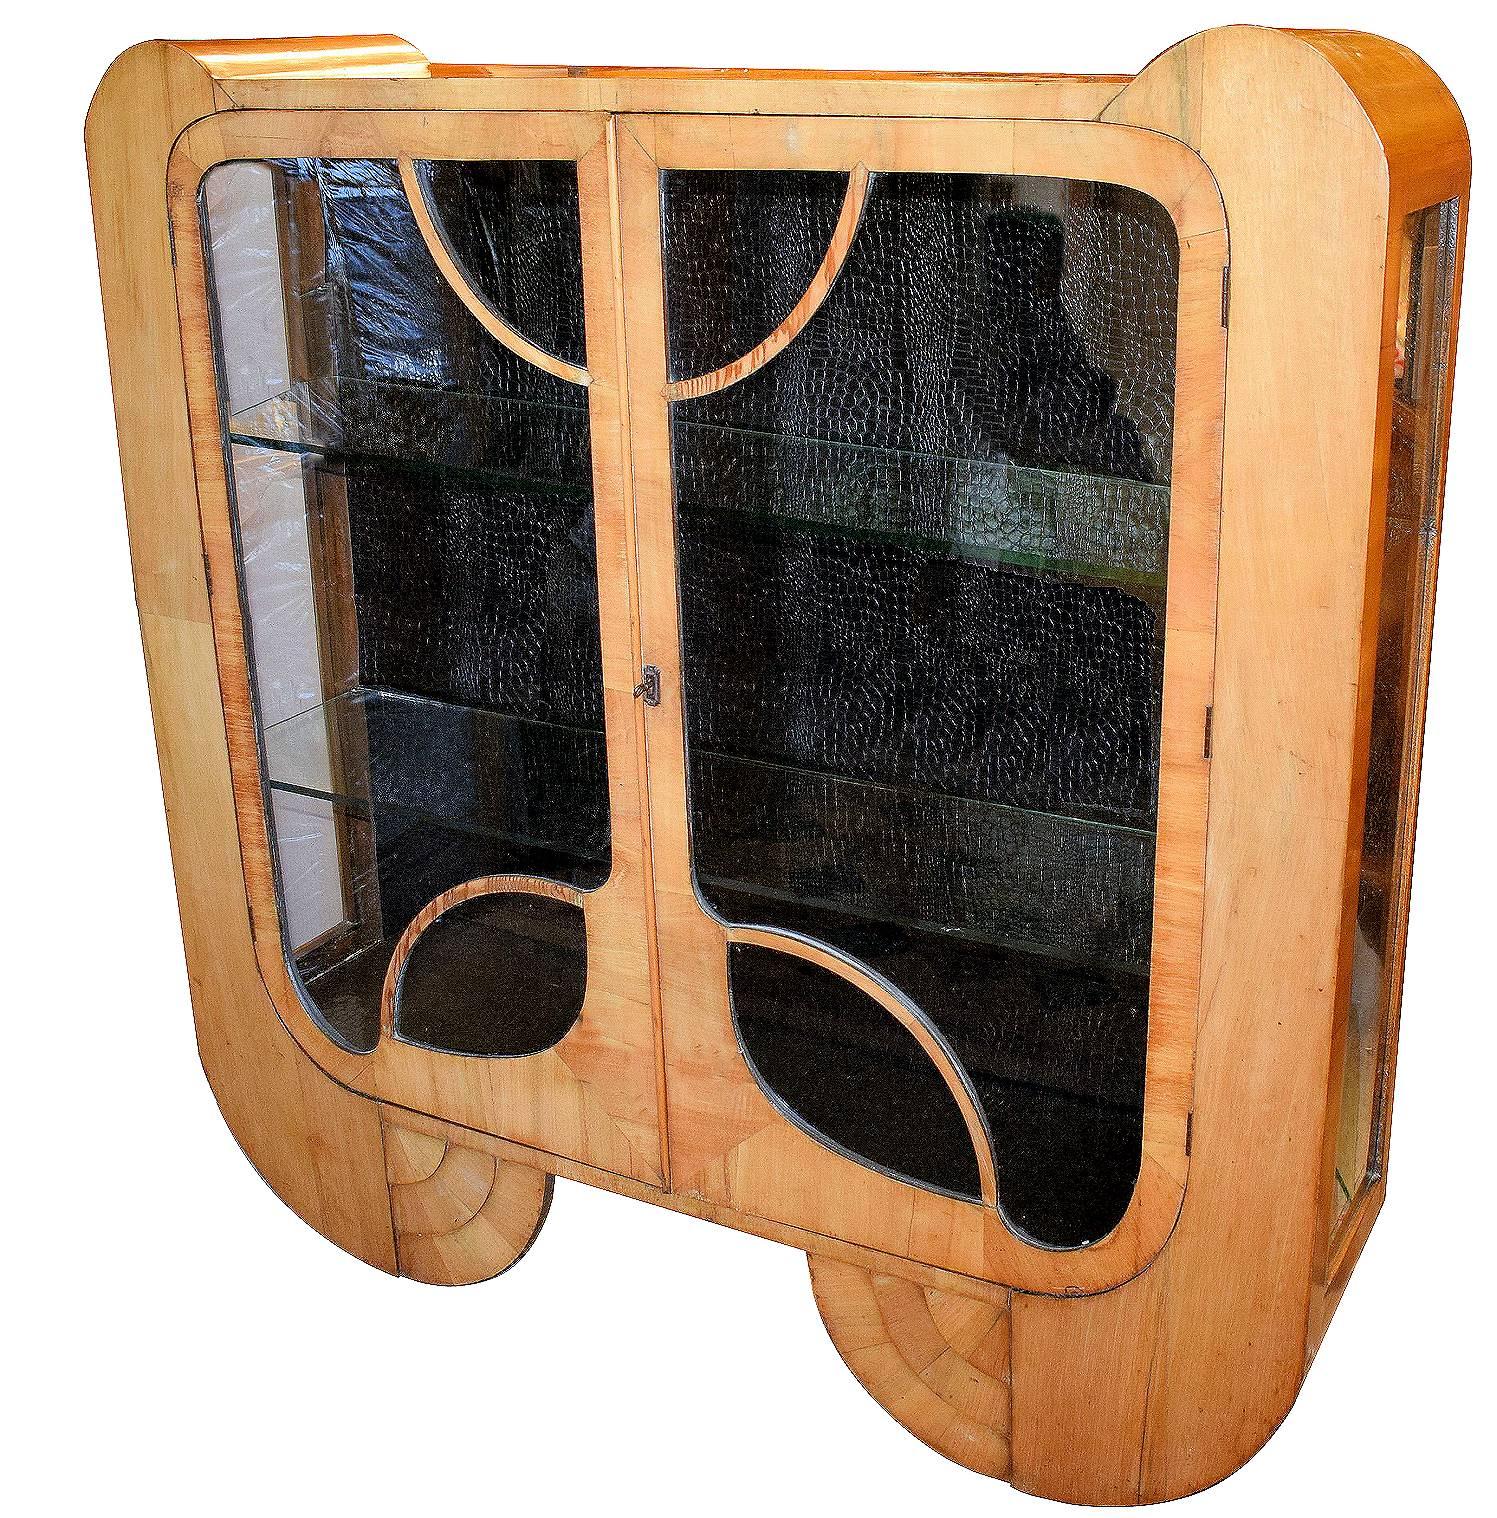 For your consideration is this high styled 1930s Art Deco modernist display cabinet. This cabinet is in a very desirable blond walnut veneer and so will easily integrate with modern furnishings if so desired. Ideal for show casing your collections,